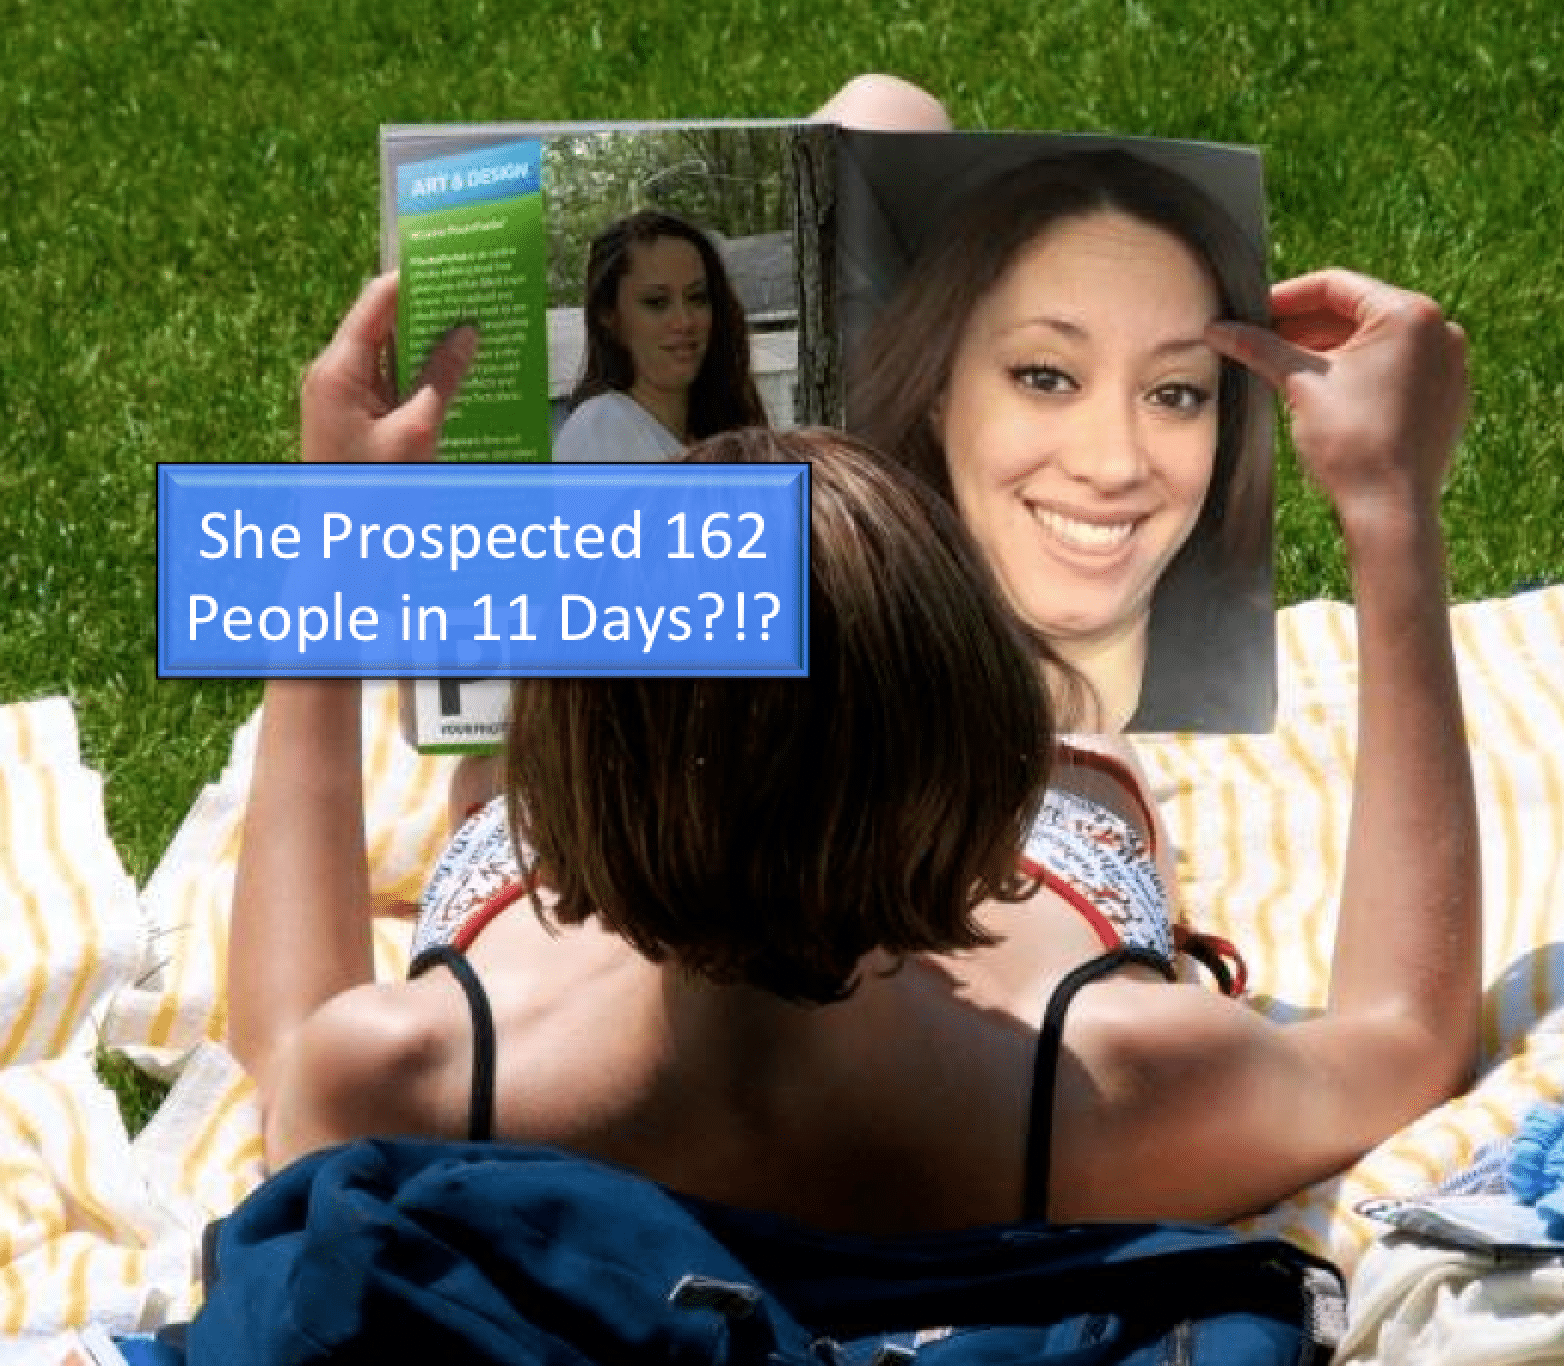 [MLM Prospecting] How Connie Prospected 162 People in 11 Days